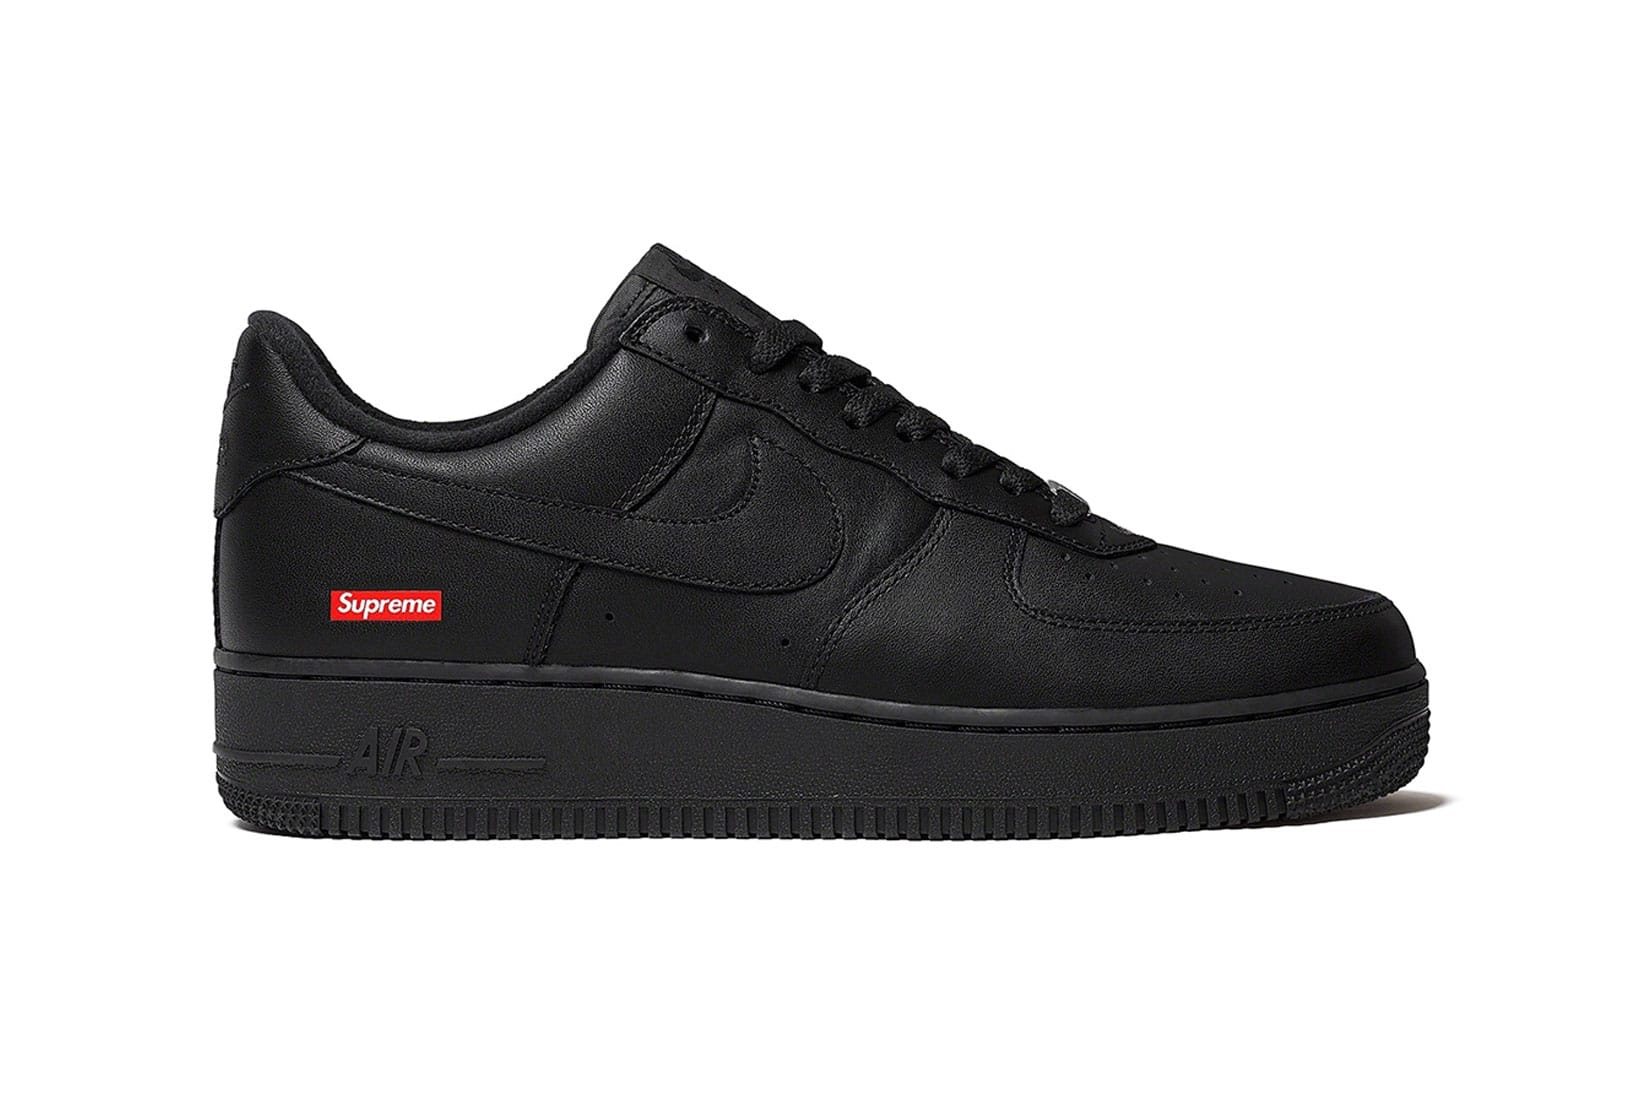 when is nike restocking air force 1